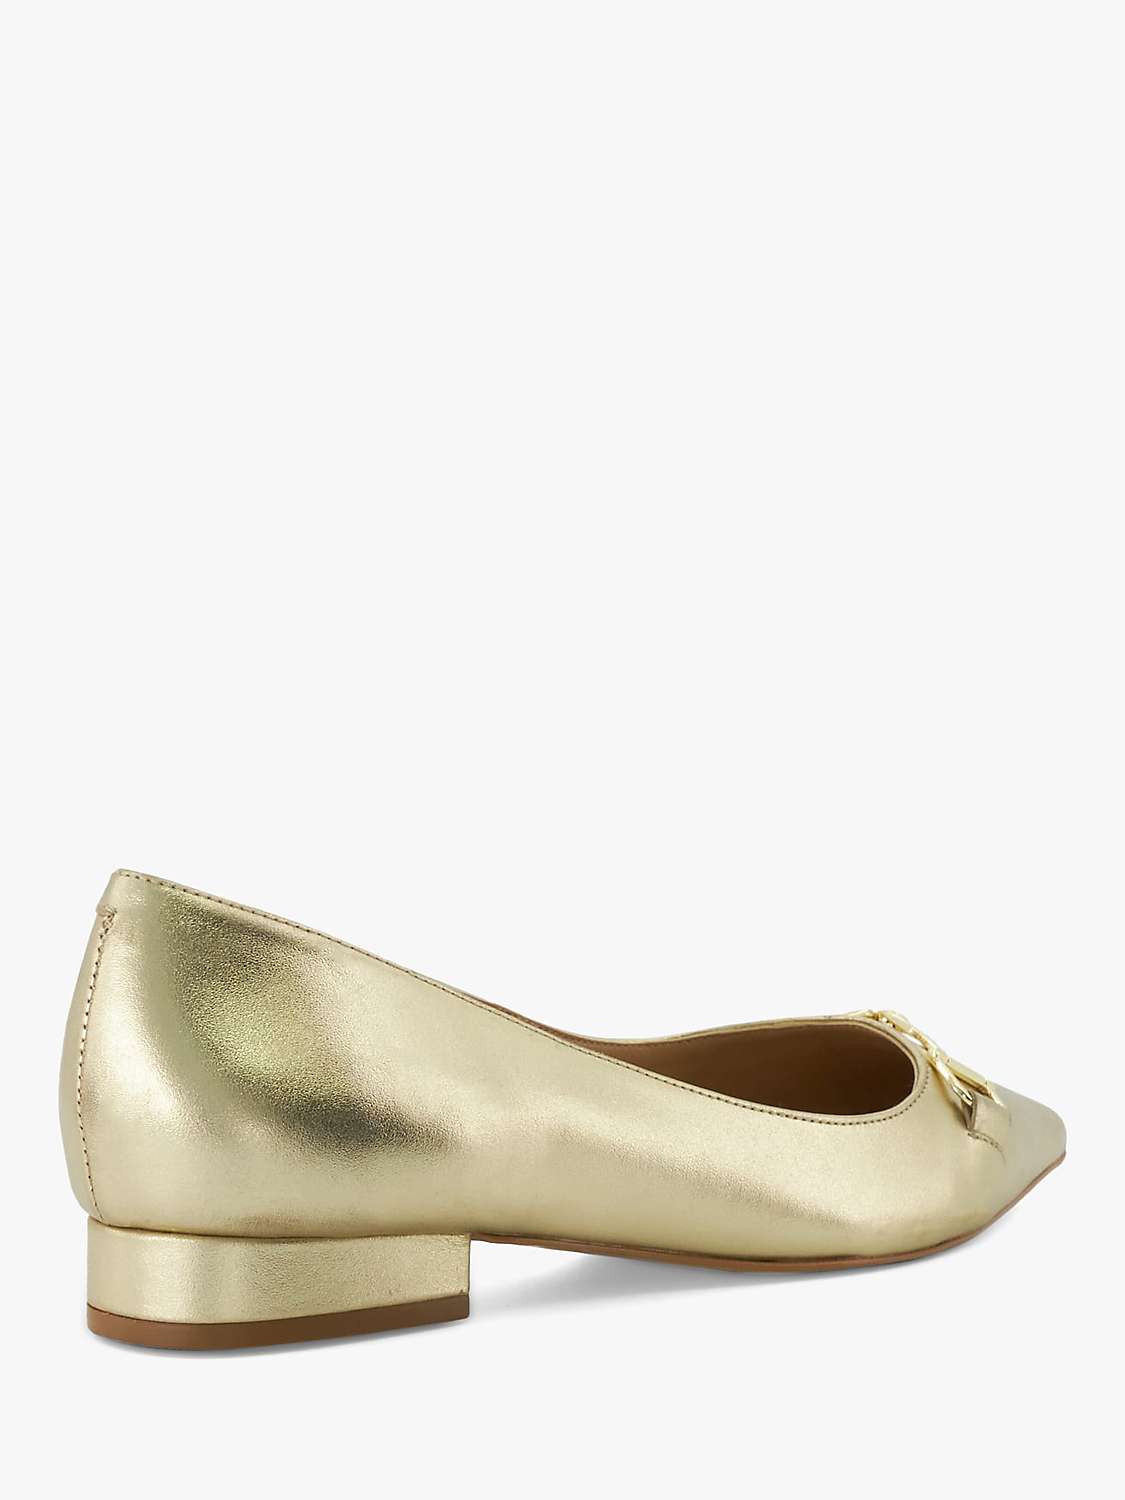 Dune Haydenne Pointed Toe Leather Pumps, Gold at John Lewis & Partners